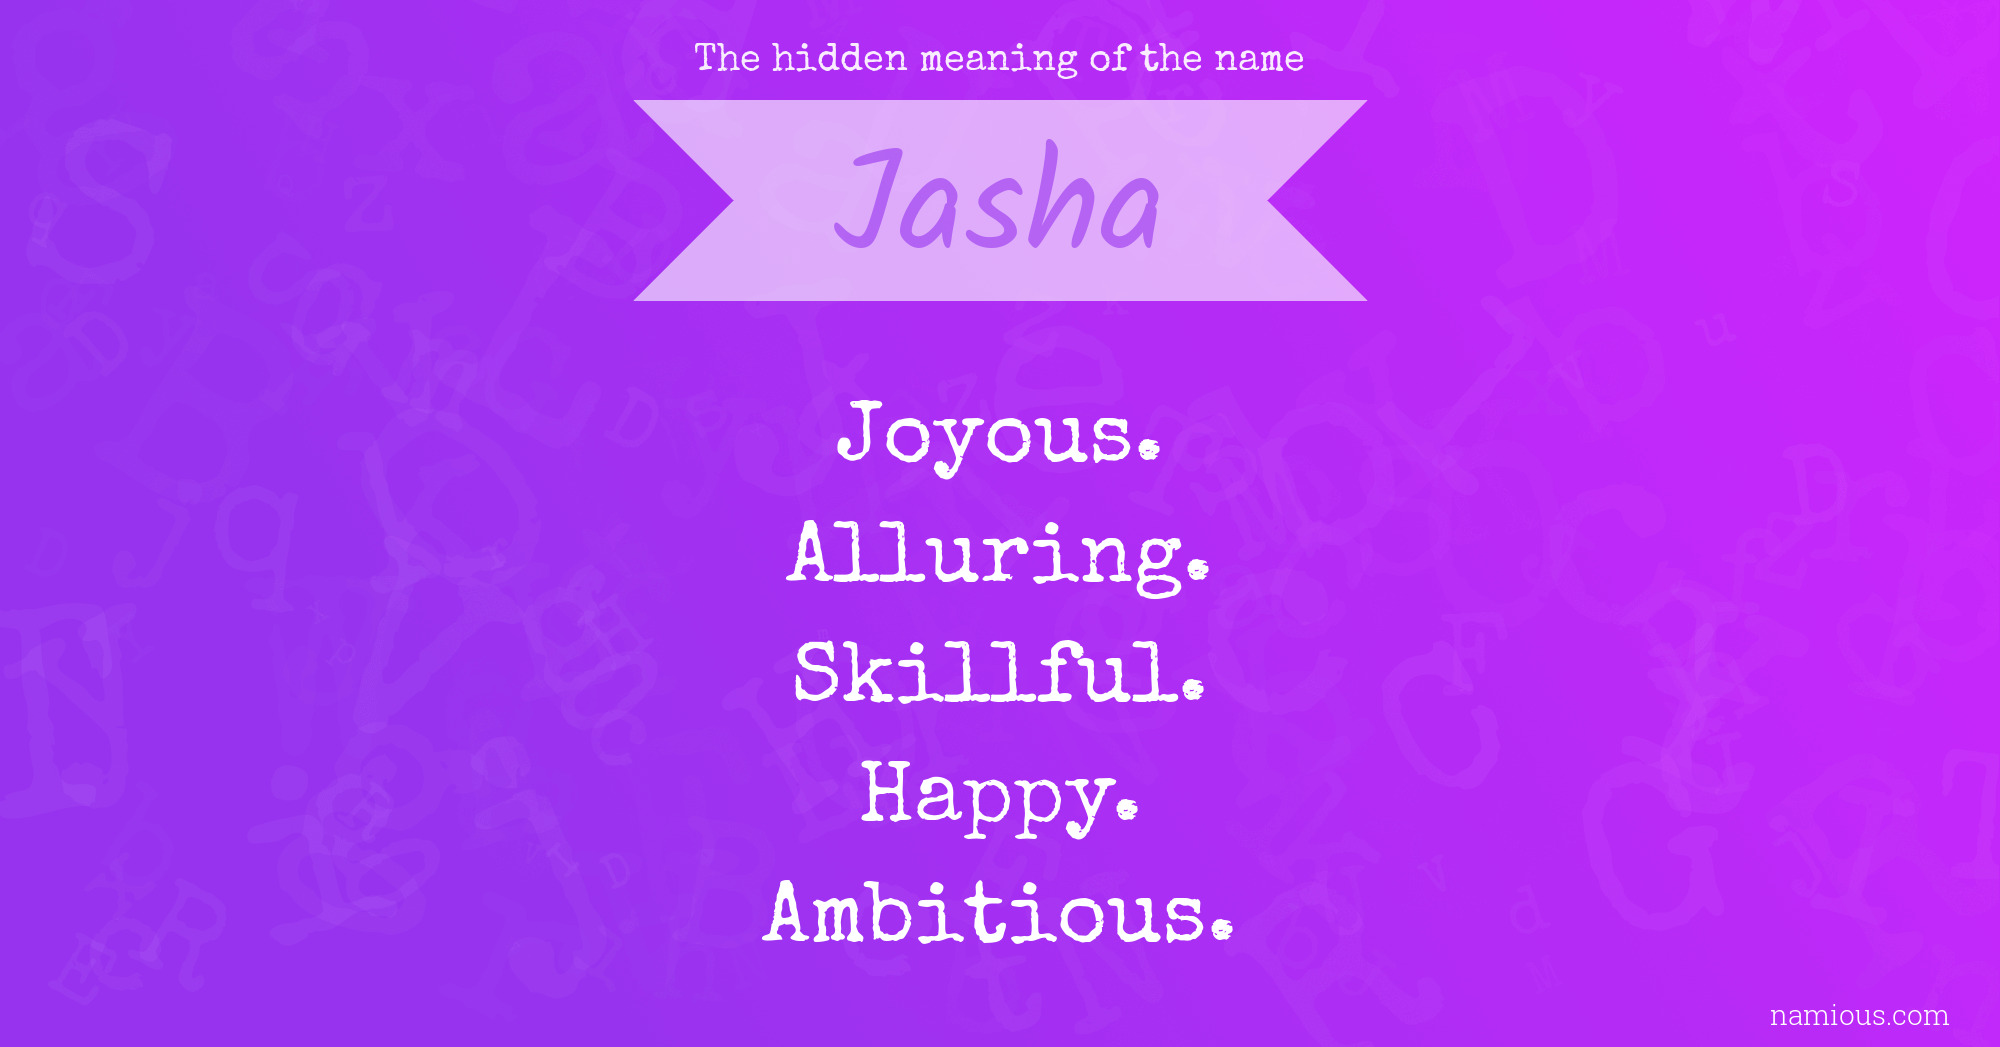 The hidden meaning of the name Jasha